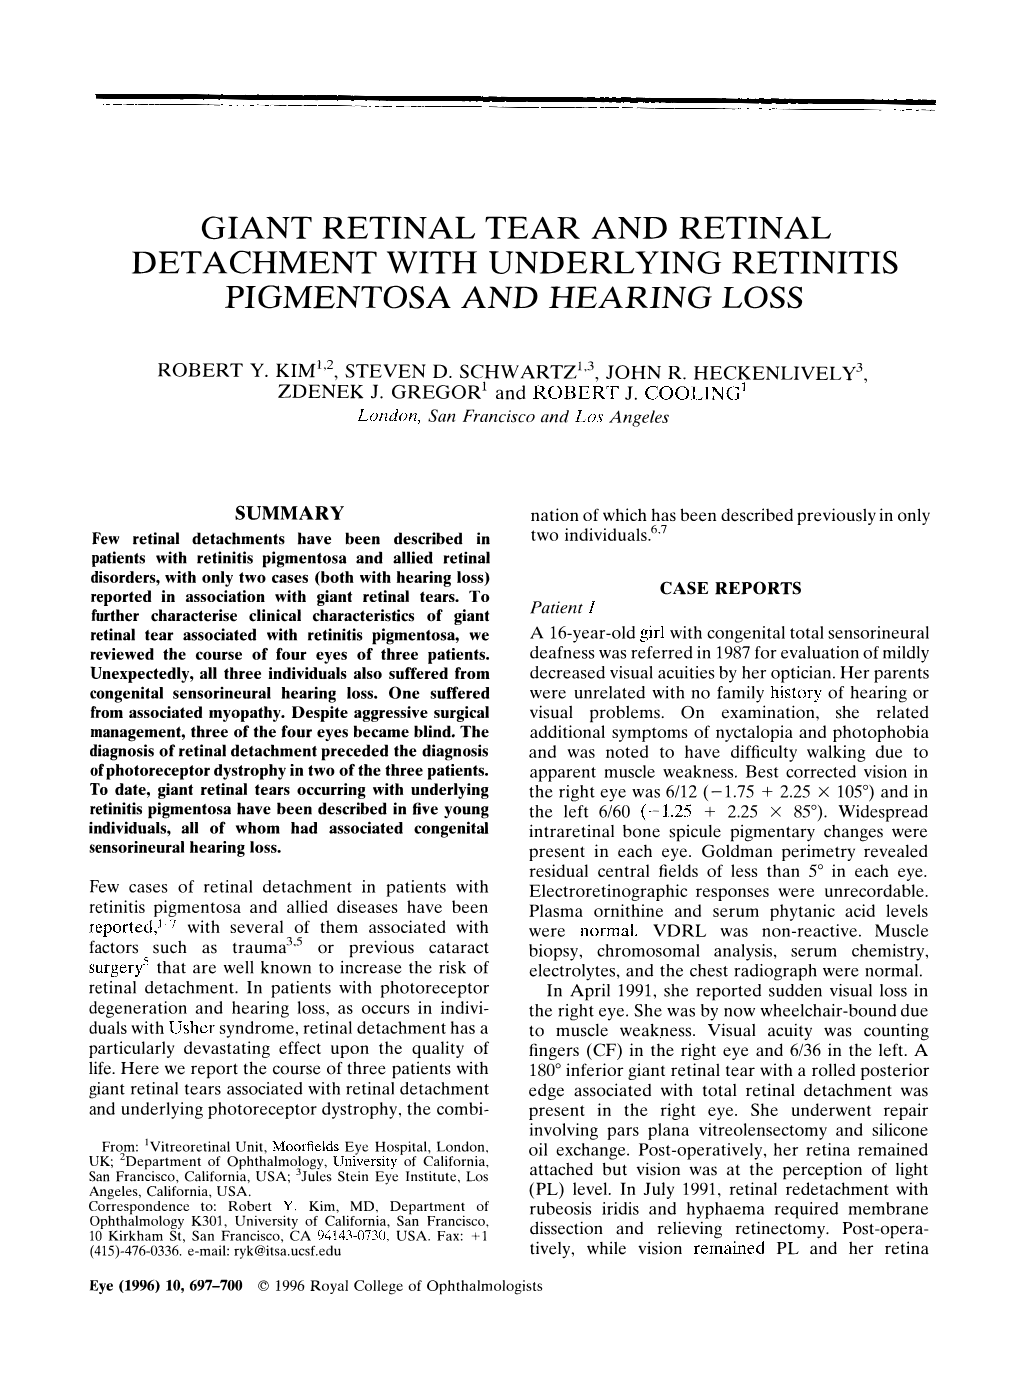 Giant Retinal Tear and Retinal Detachment with Underlying Retinitis Pigmentosa and Hearing Loss